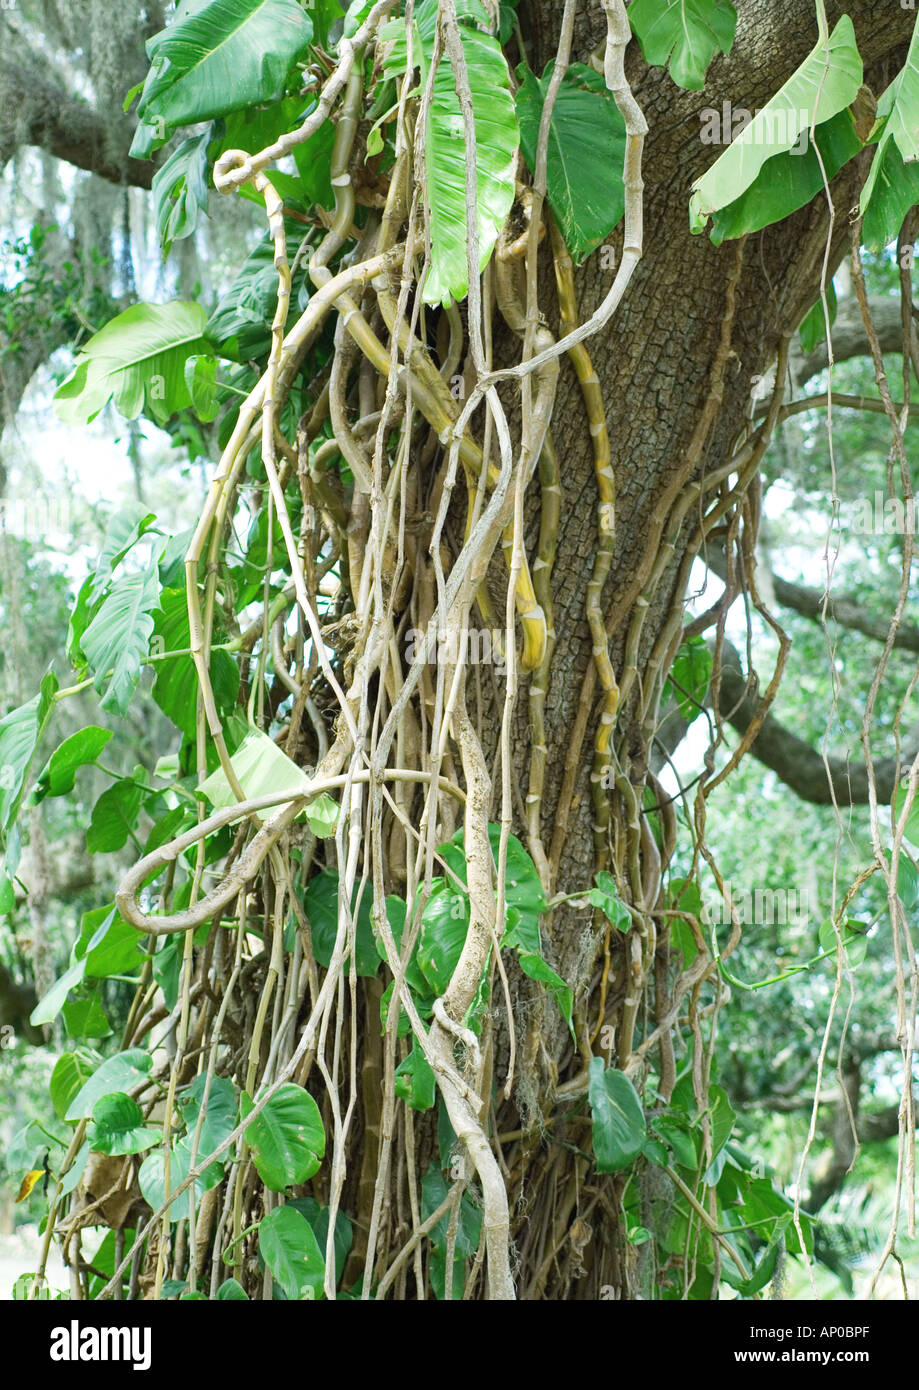 Vines hanging from tree Stock Photo